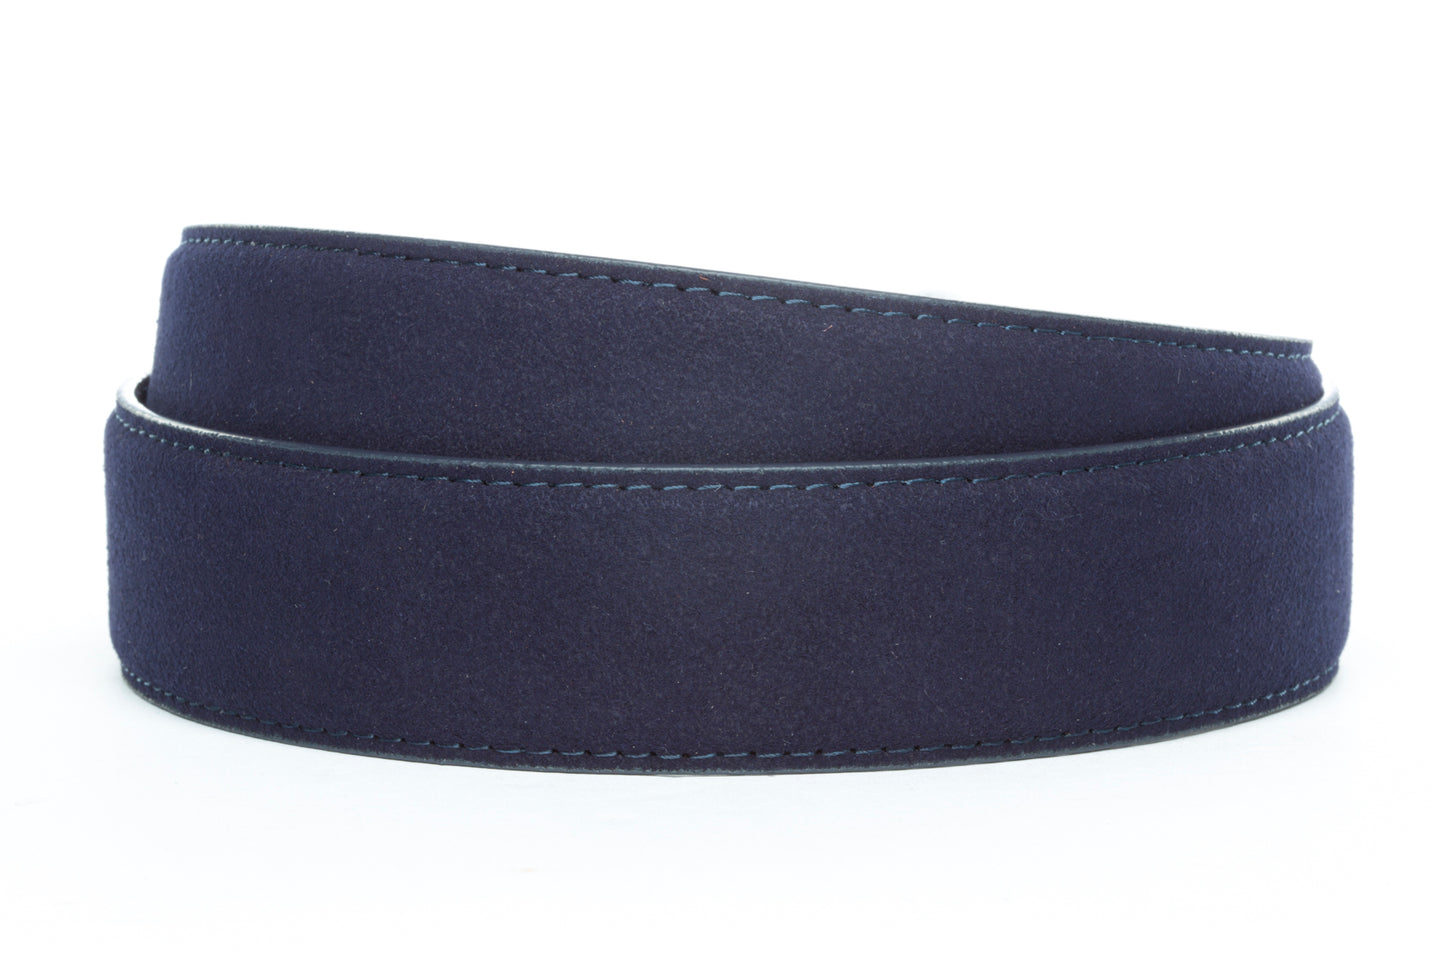 Men's micro-suede belt strap in navy, 1.5 inches wide, formal look